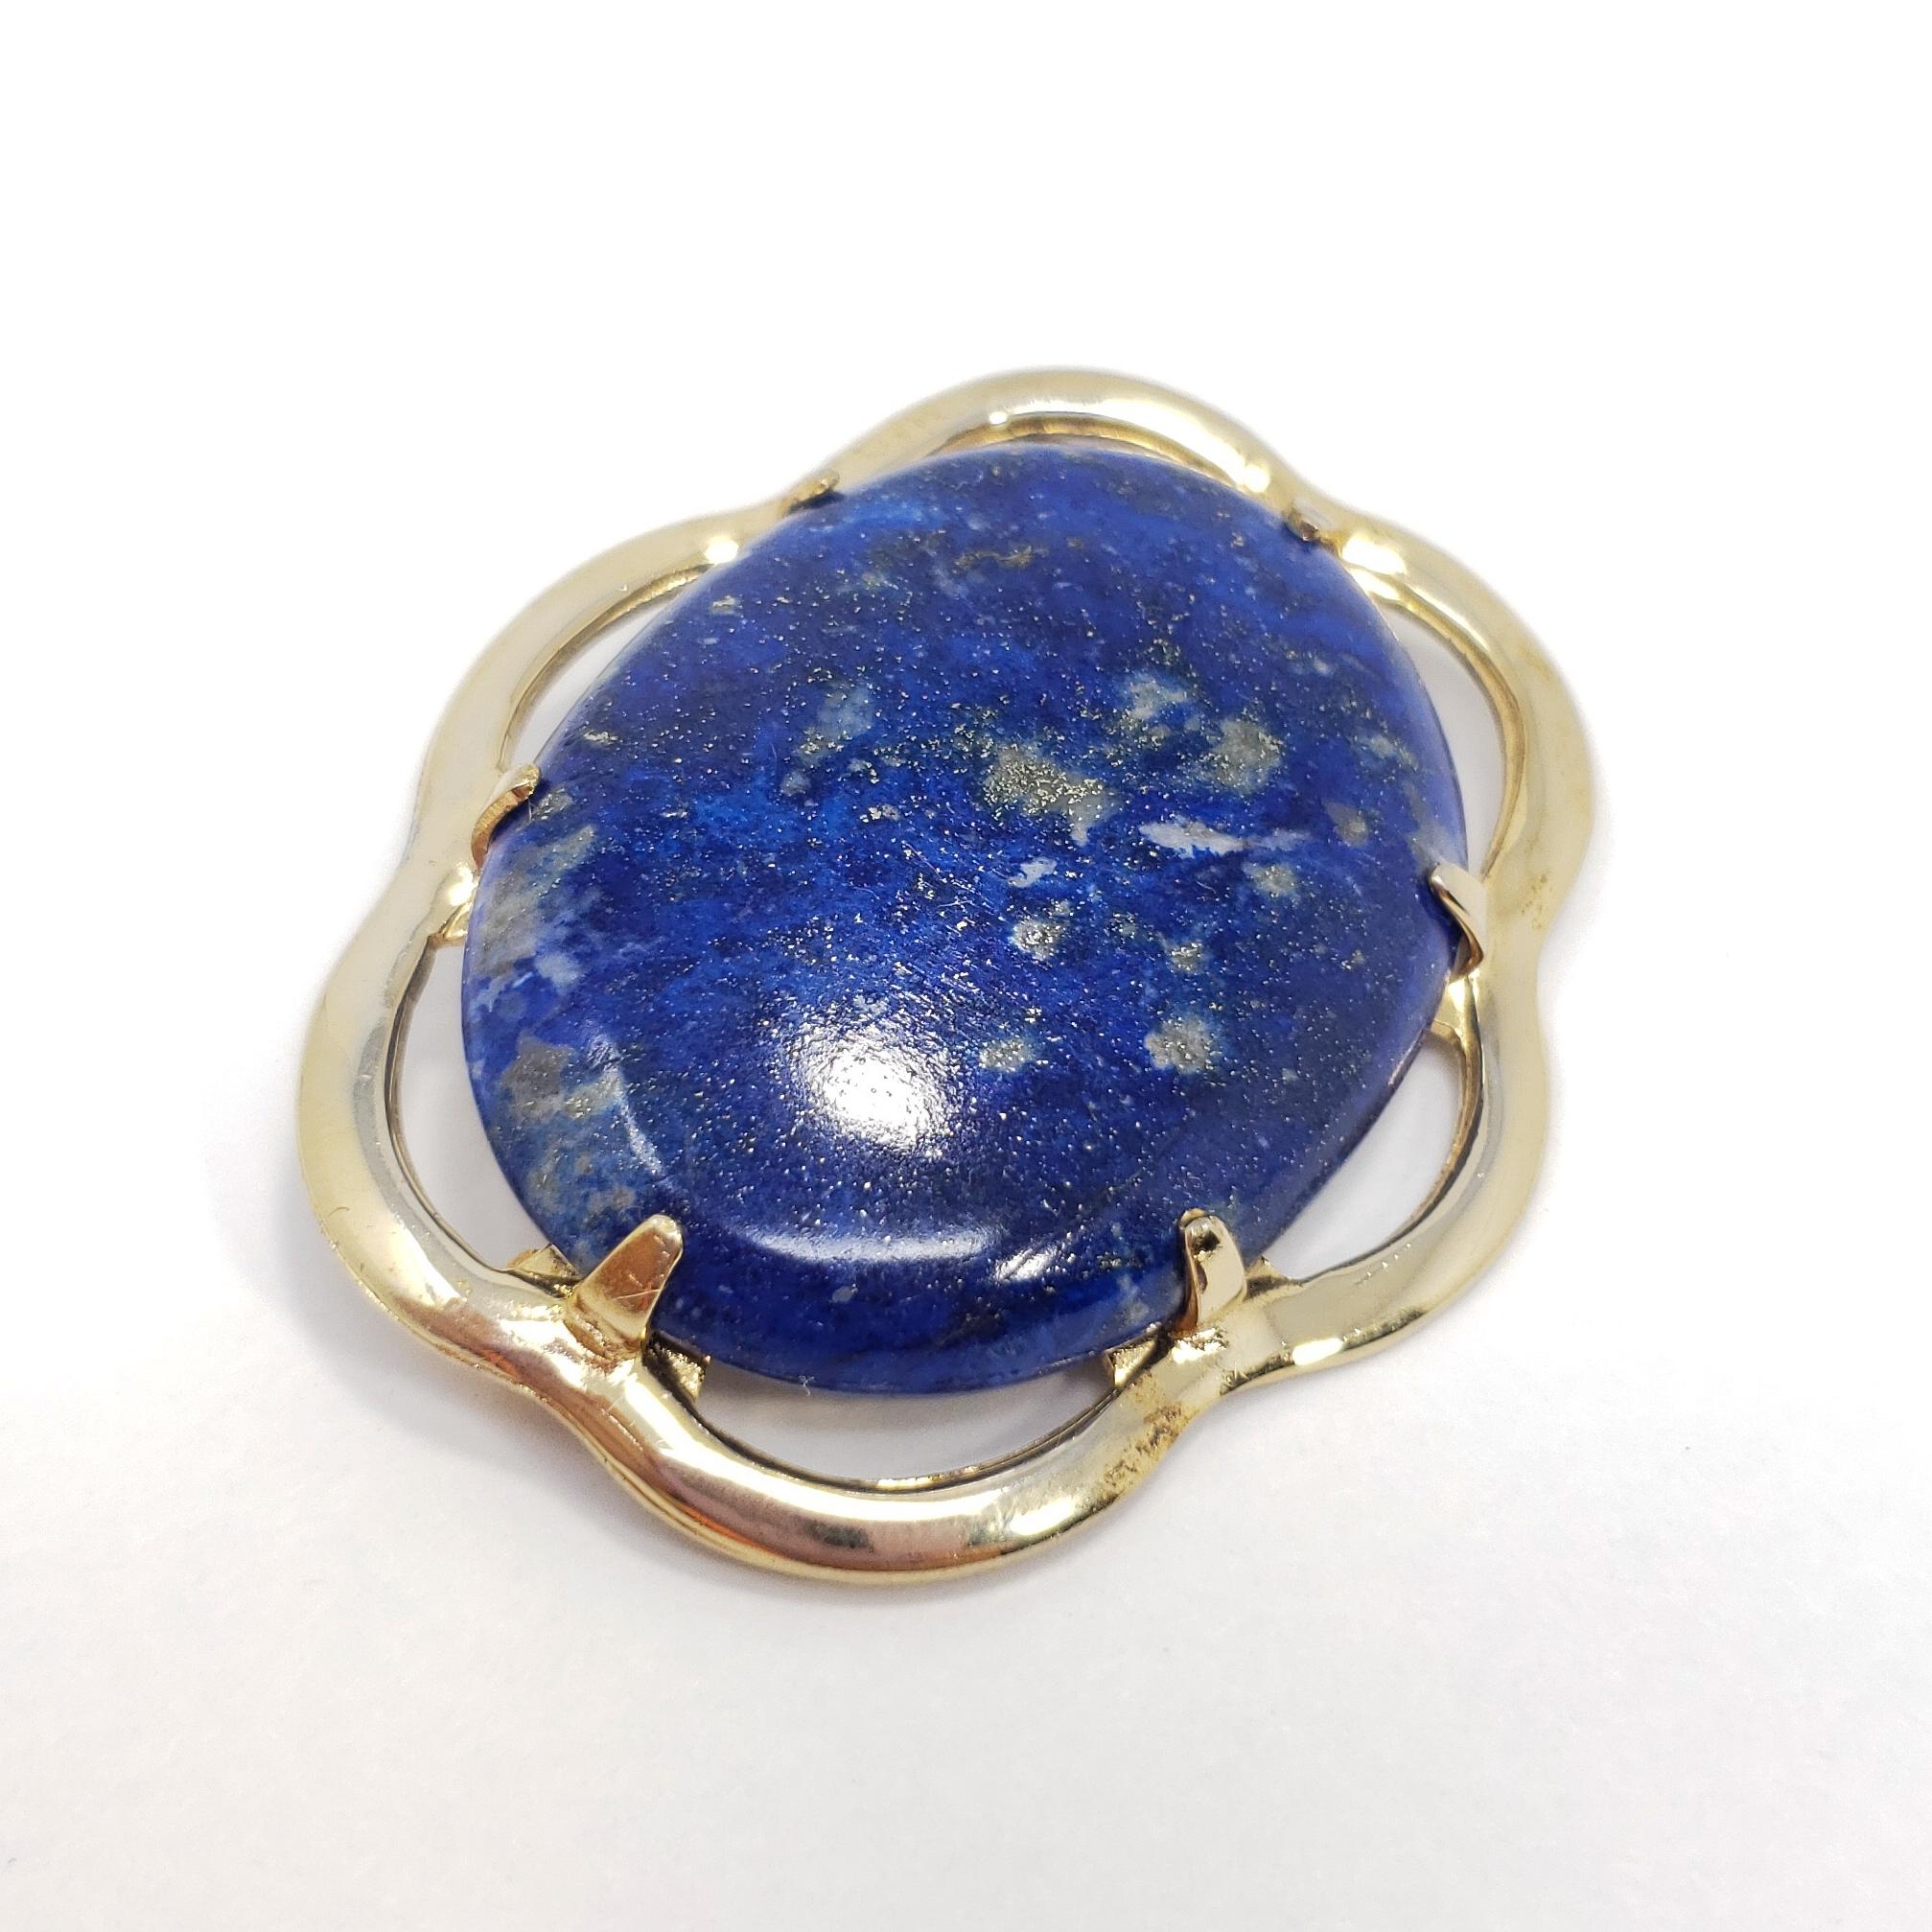 A sophisticated accessory! This pin-brooch features a single lapis lazuli cabochon, prong-set in an elegant, gold-filled, open-back, setting.